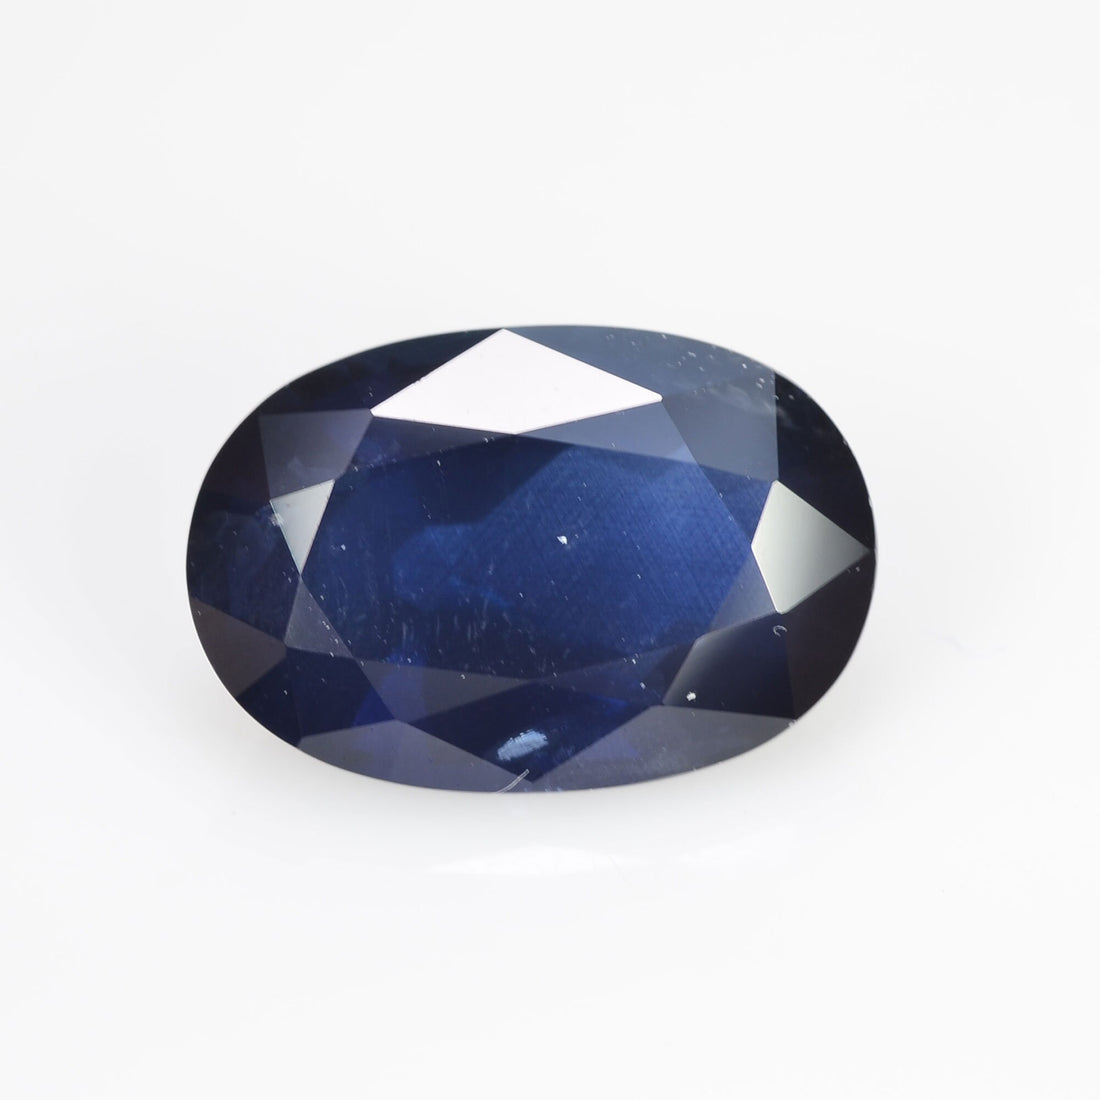 5.87 cts Natural Blue Sapphire Loose Gemstone Oval Cut